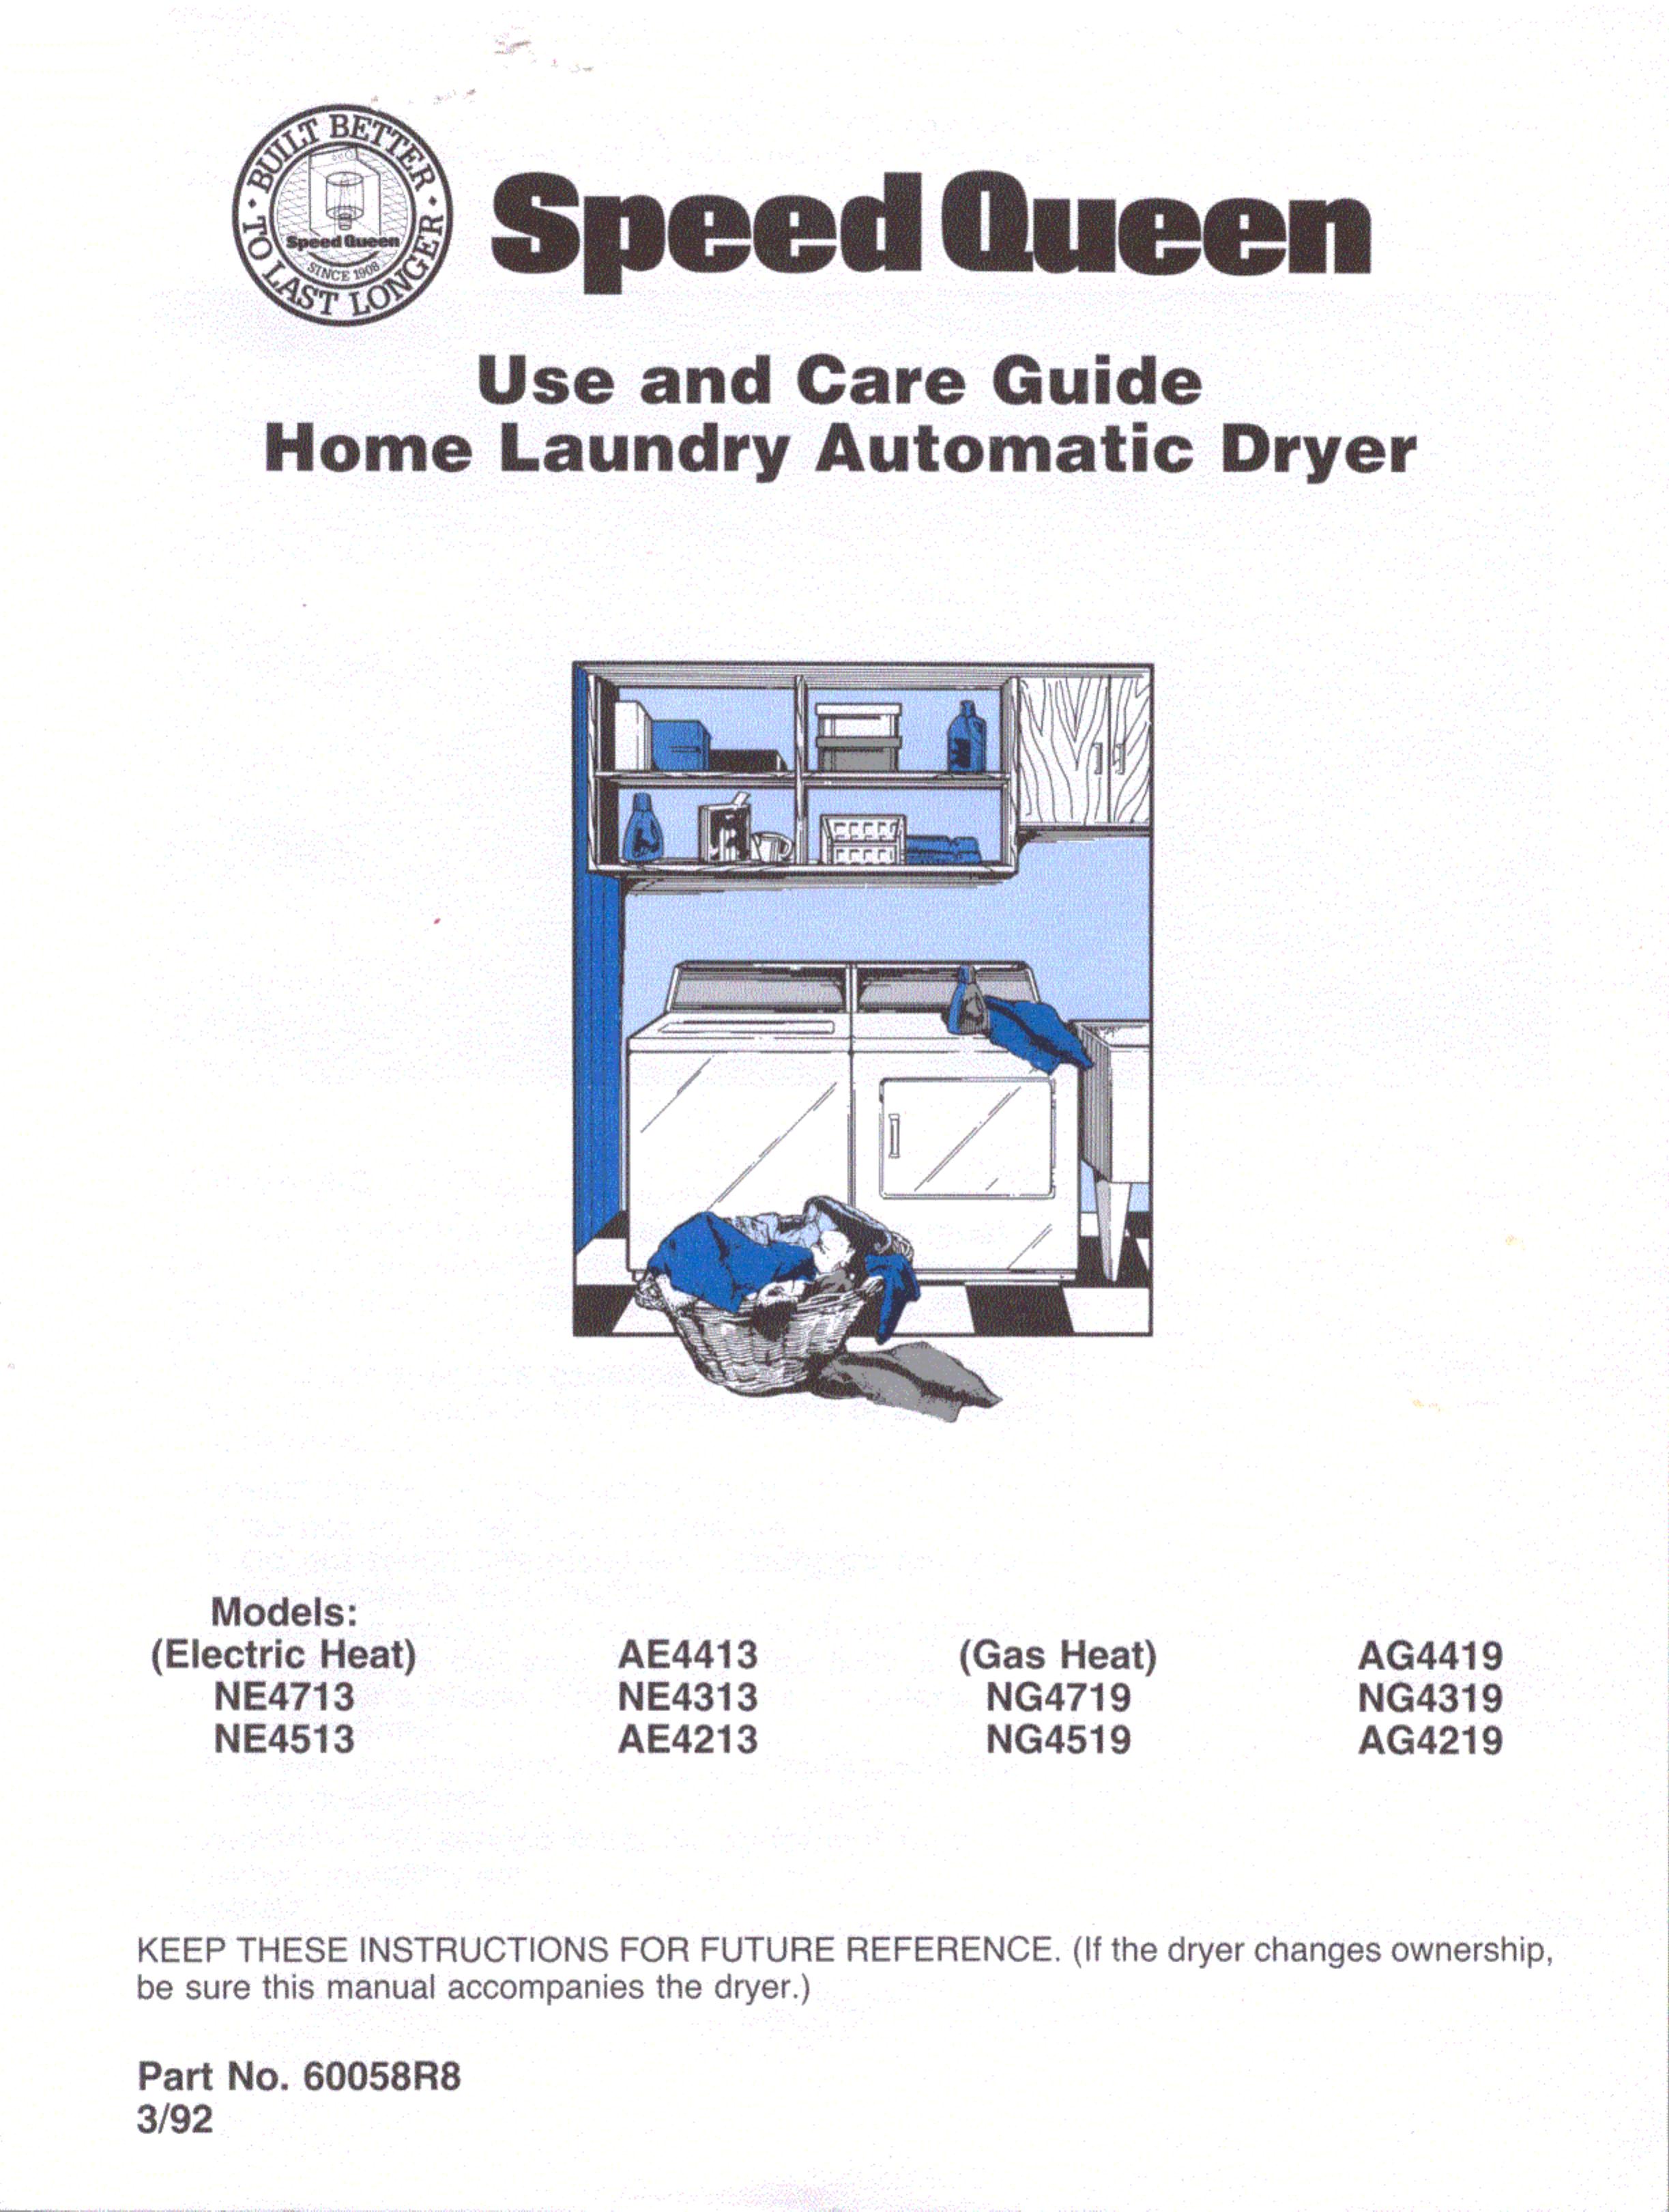 Speed Queen AE4413 Clothes Dryer User Manual